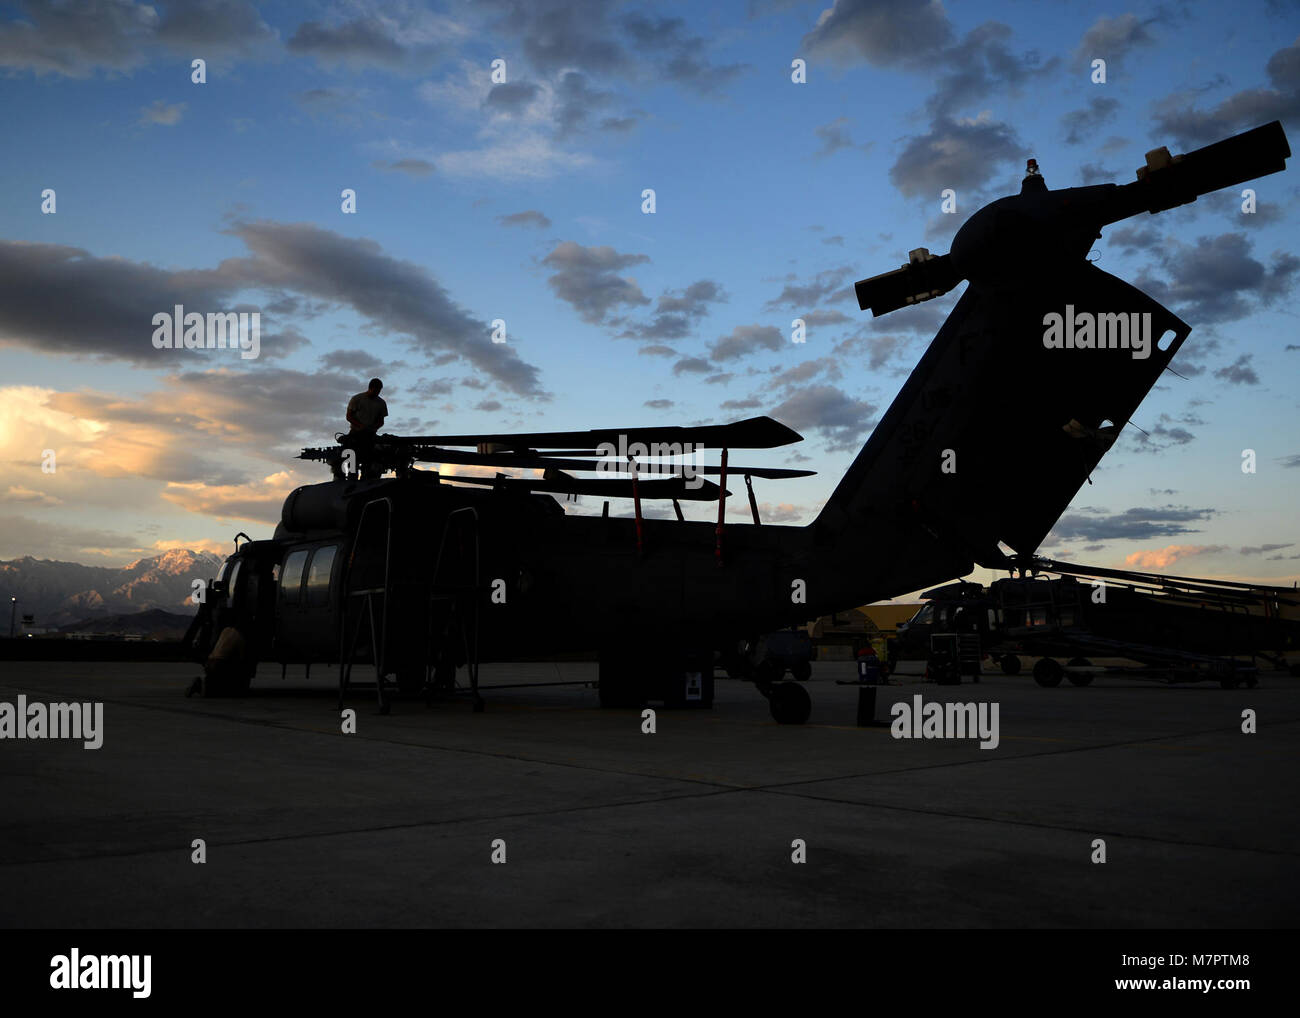 U. S. Air Force Airmen from the 455th Expeditionary Aircraft Maintenance Squadron, break down an HH-60G Pave Hawk helicopter at Bagram Airfield, Afghanistan June 2, 2014.  The unit is preparing the helicopter for redeployment to their home base Moody Air Force Base, Ga.  Helicopter maintainers here ensure Bagram’s combat search and rescue helicopters are ready to fly at a moment’s notice. (U.S. Air Force photo by Staff Sgt. Evelyn Chavez/Released) 455th Air Expeditionary Wing Bagram Airfield, Afghanistan Stock Photo